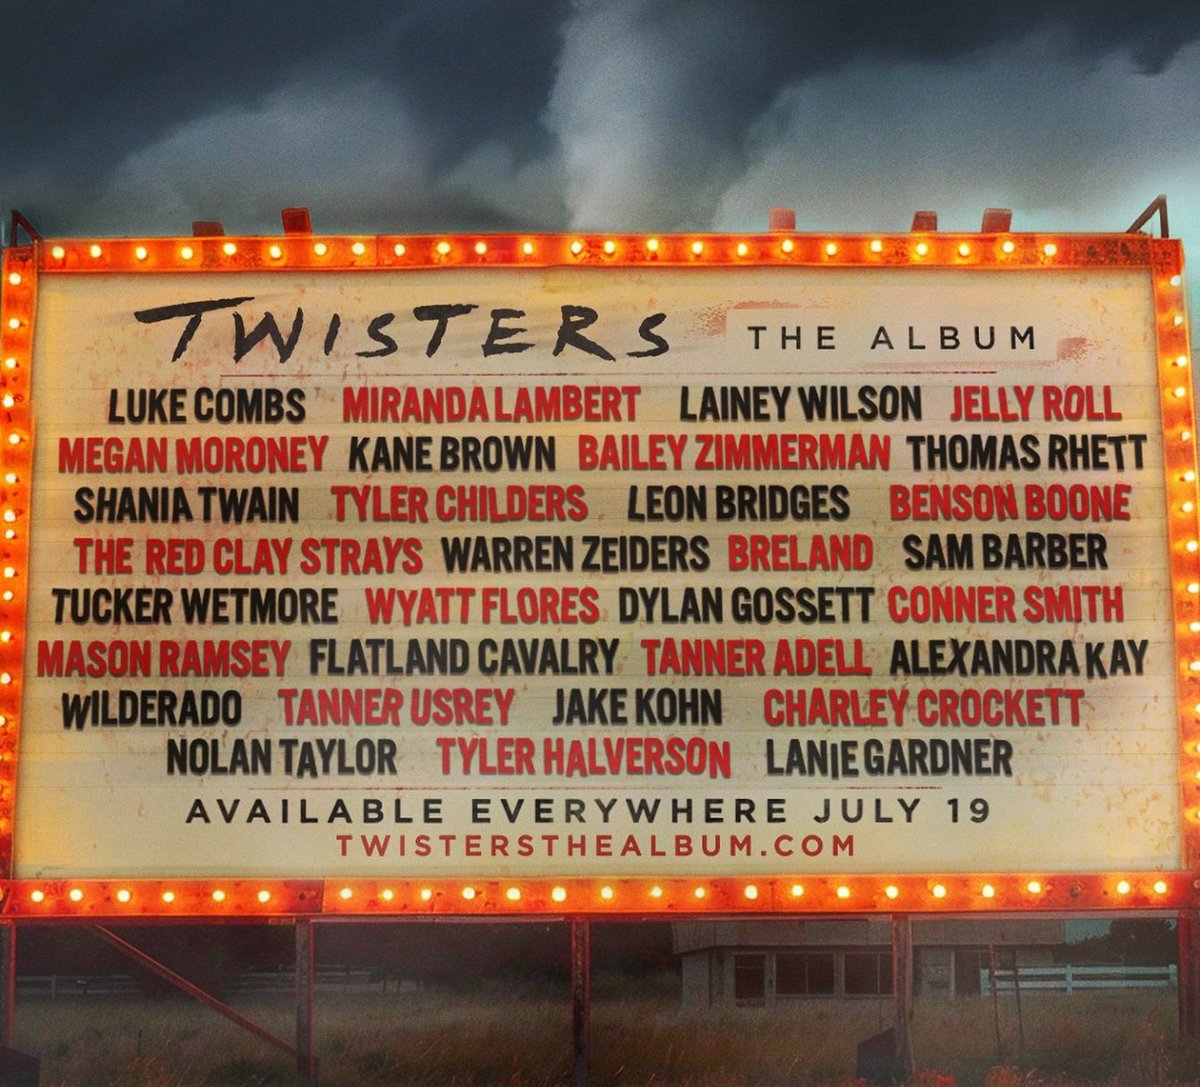 The lineup for the TWISTERS soundtrack has been revealed